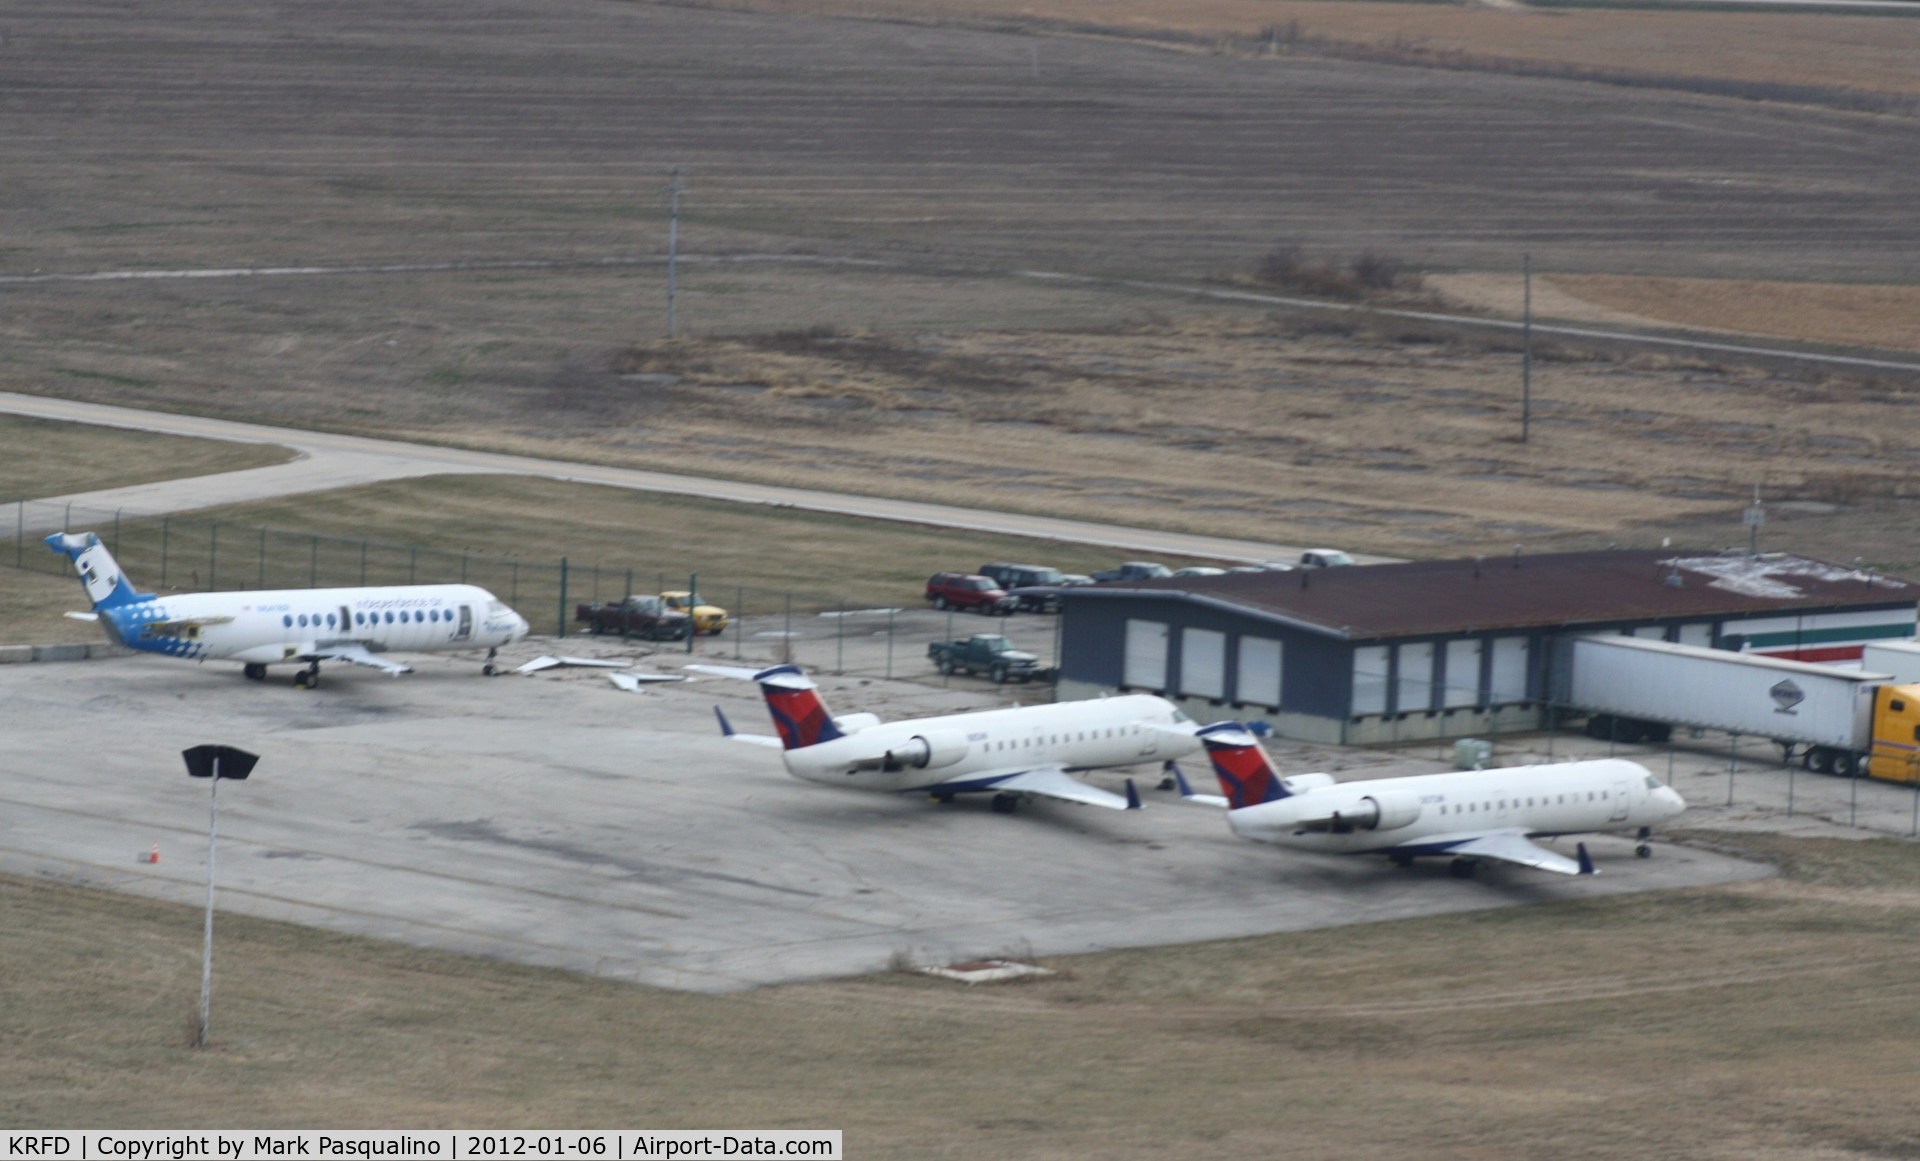 Chicago/rockford International Airport (RFD) - Regional airliners being scrapped